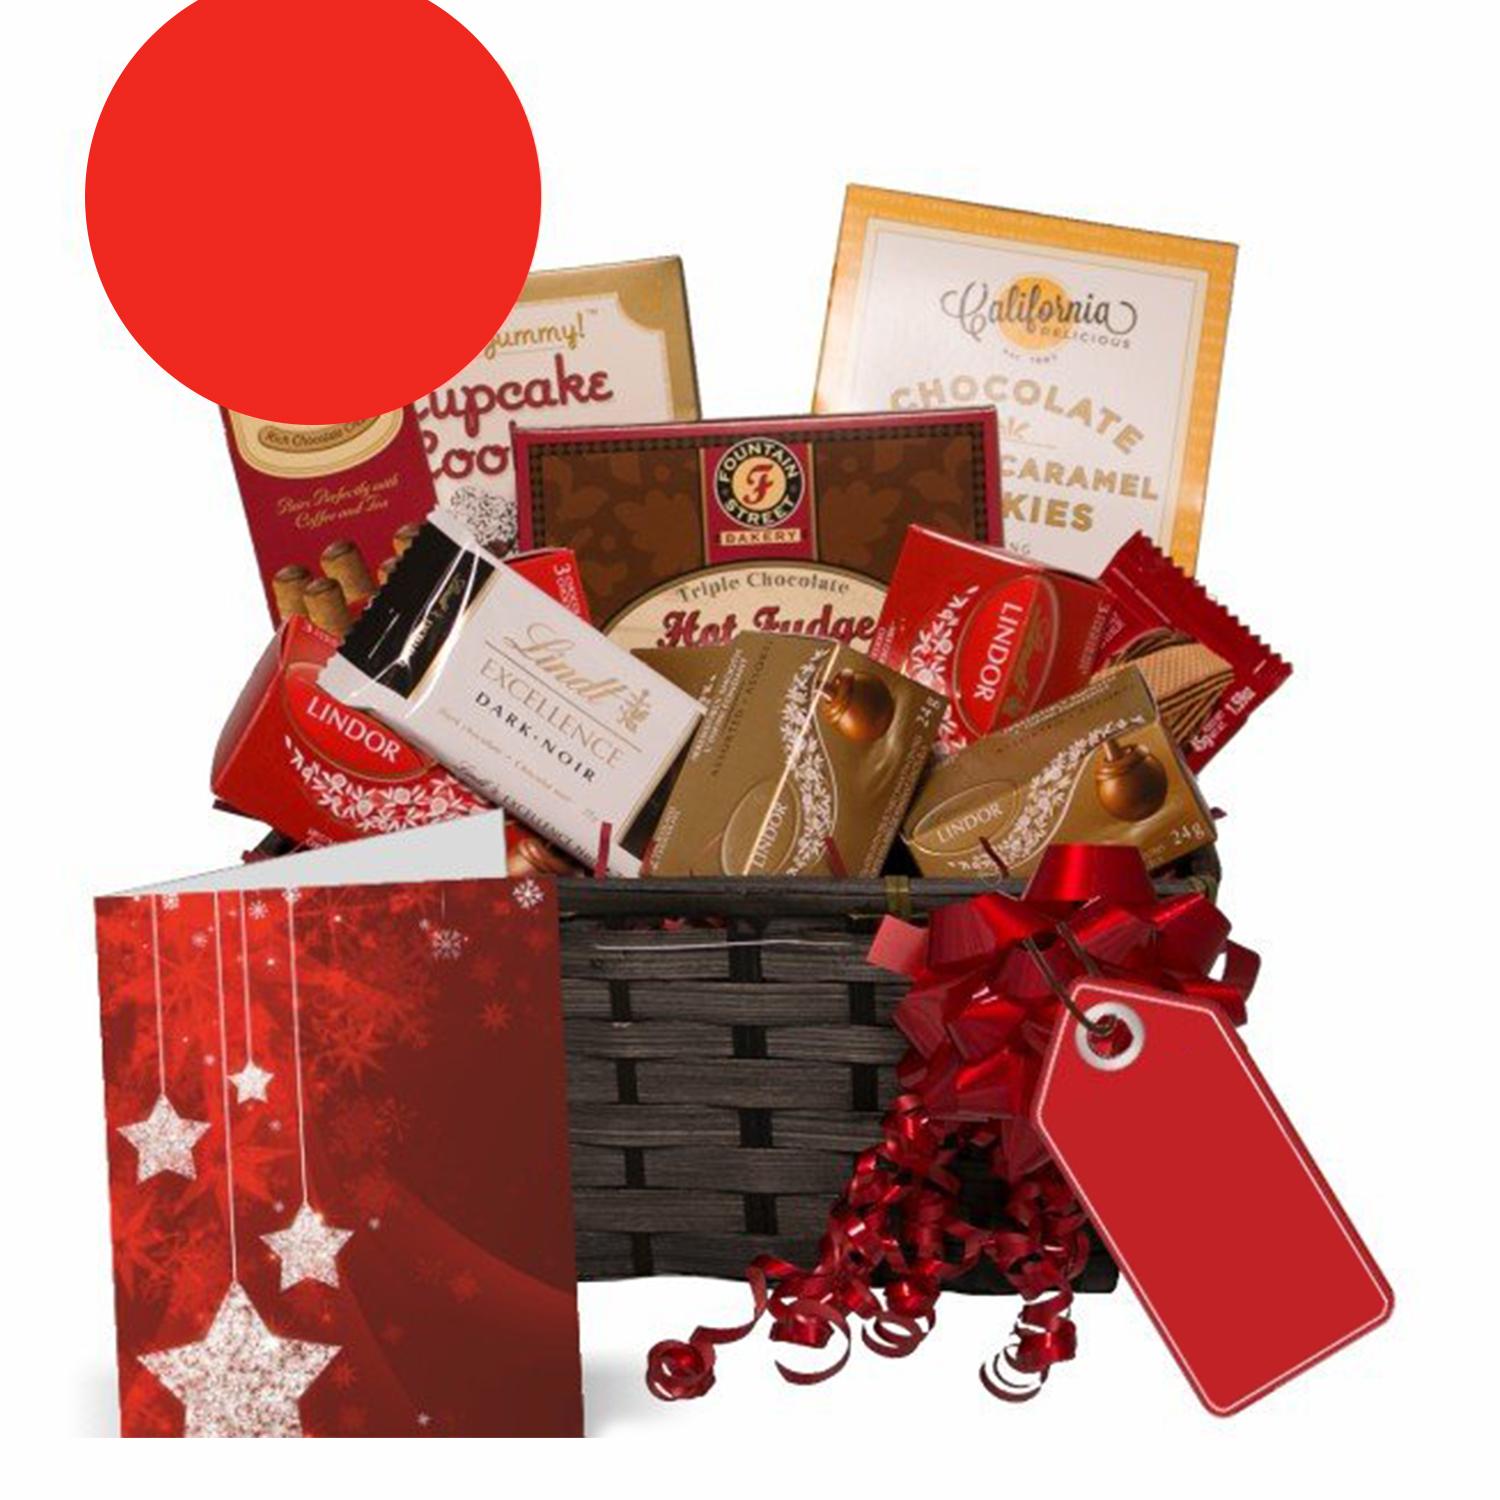 Wonderful Chocolate Gifts Basket for Diwali to India | Free Shipping